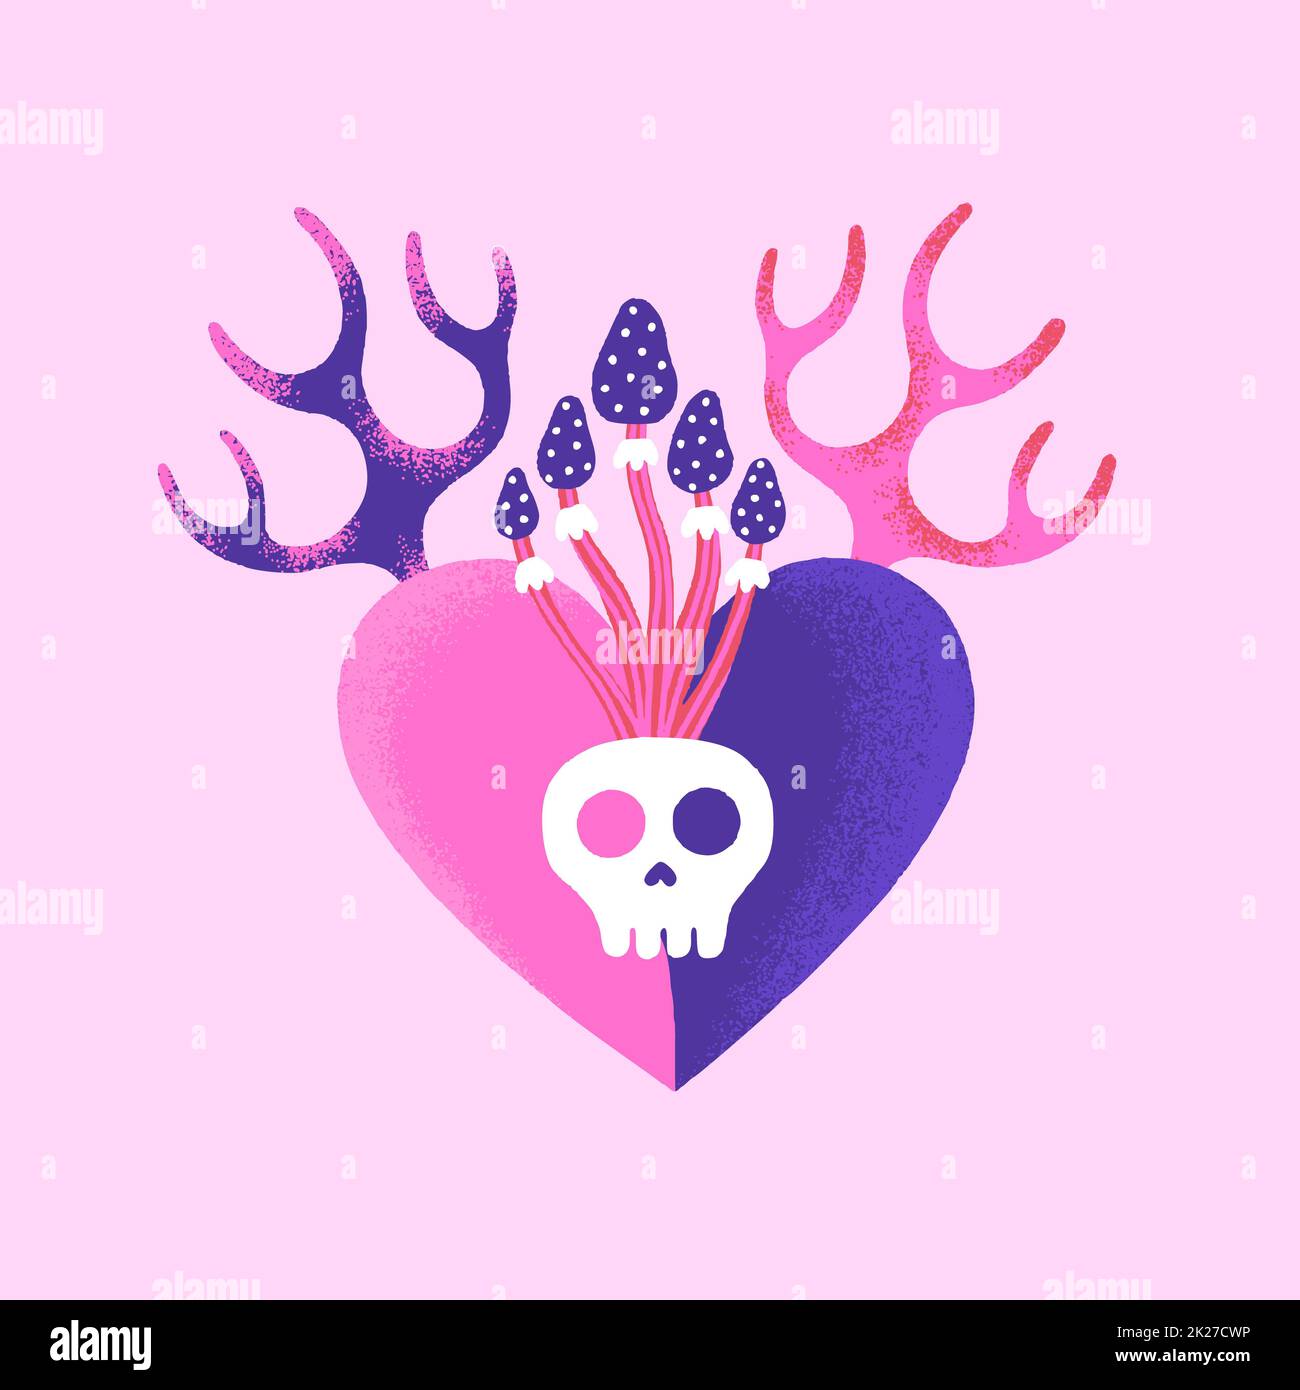 Dangerous heart. Creative Valentines Day card. Contemporary art. Mystical vector illustration in pink and purple colors Stock Photo